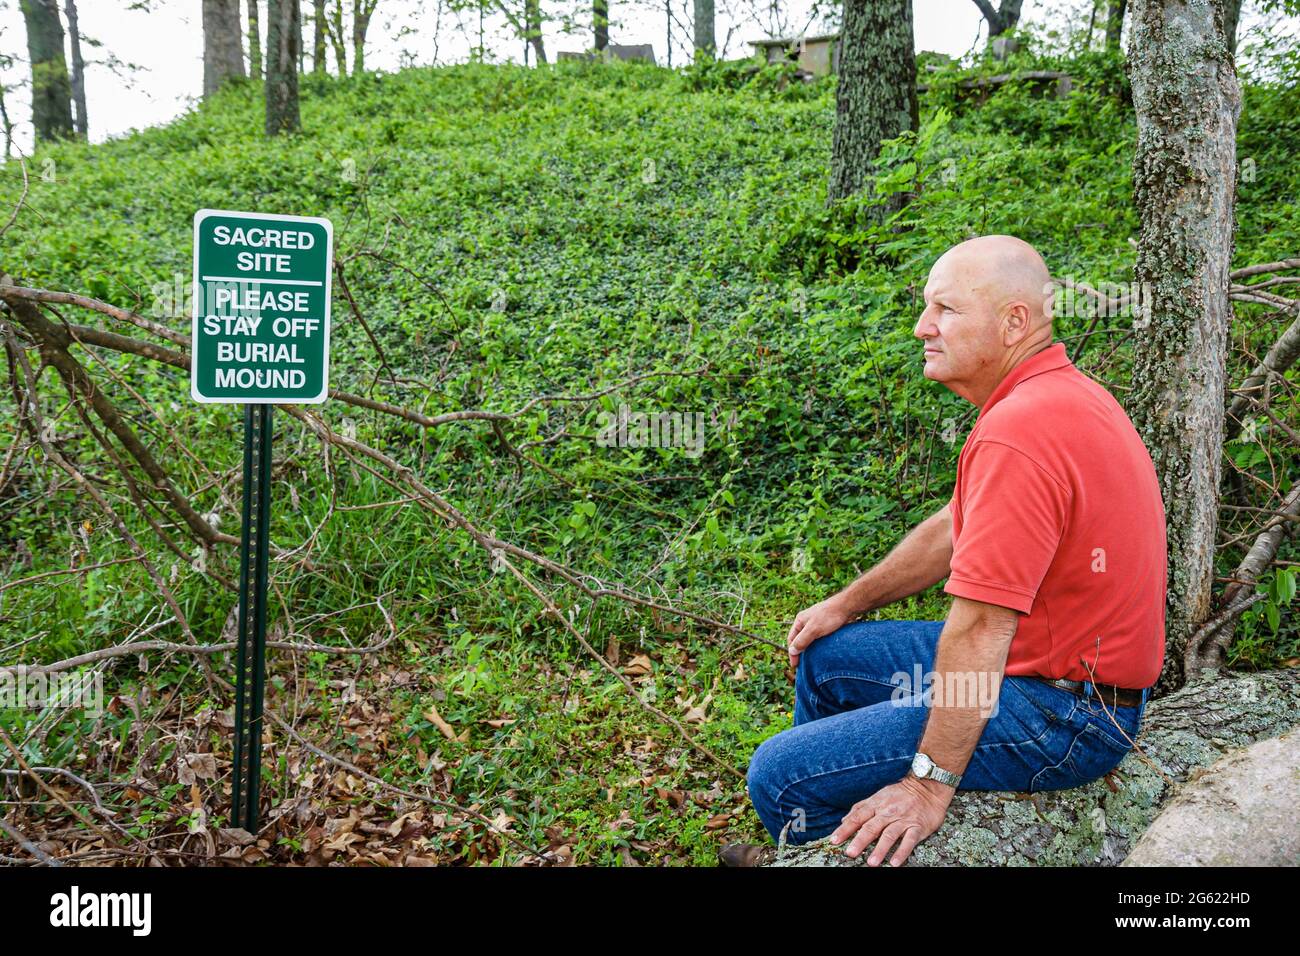 Alabama Oakville Indian Mounds Park Museum Middle Woodland Copena Cherokee,Cherokee author Rickey Butch Walker near sacred site burial mound, Stock Photo